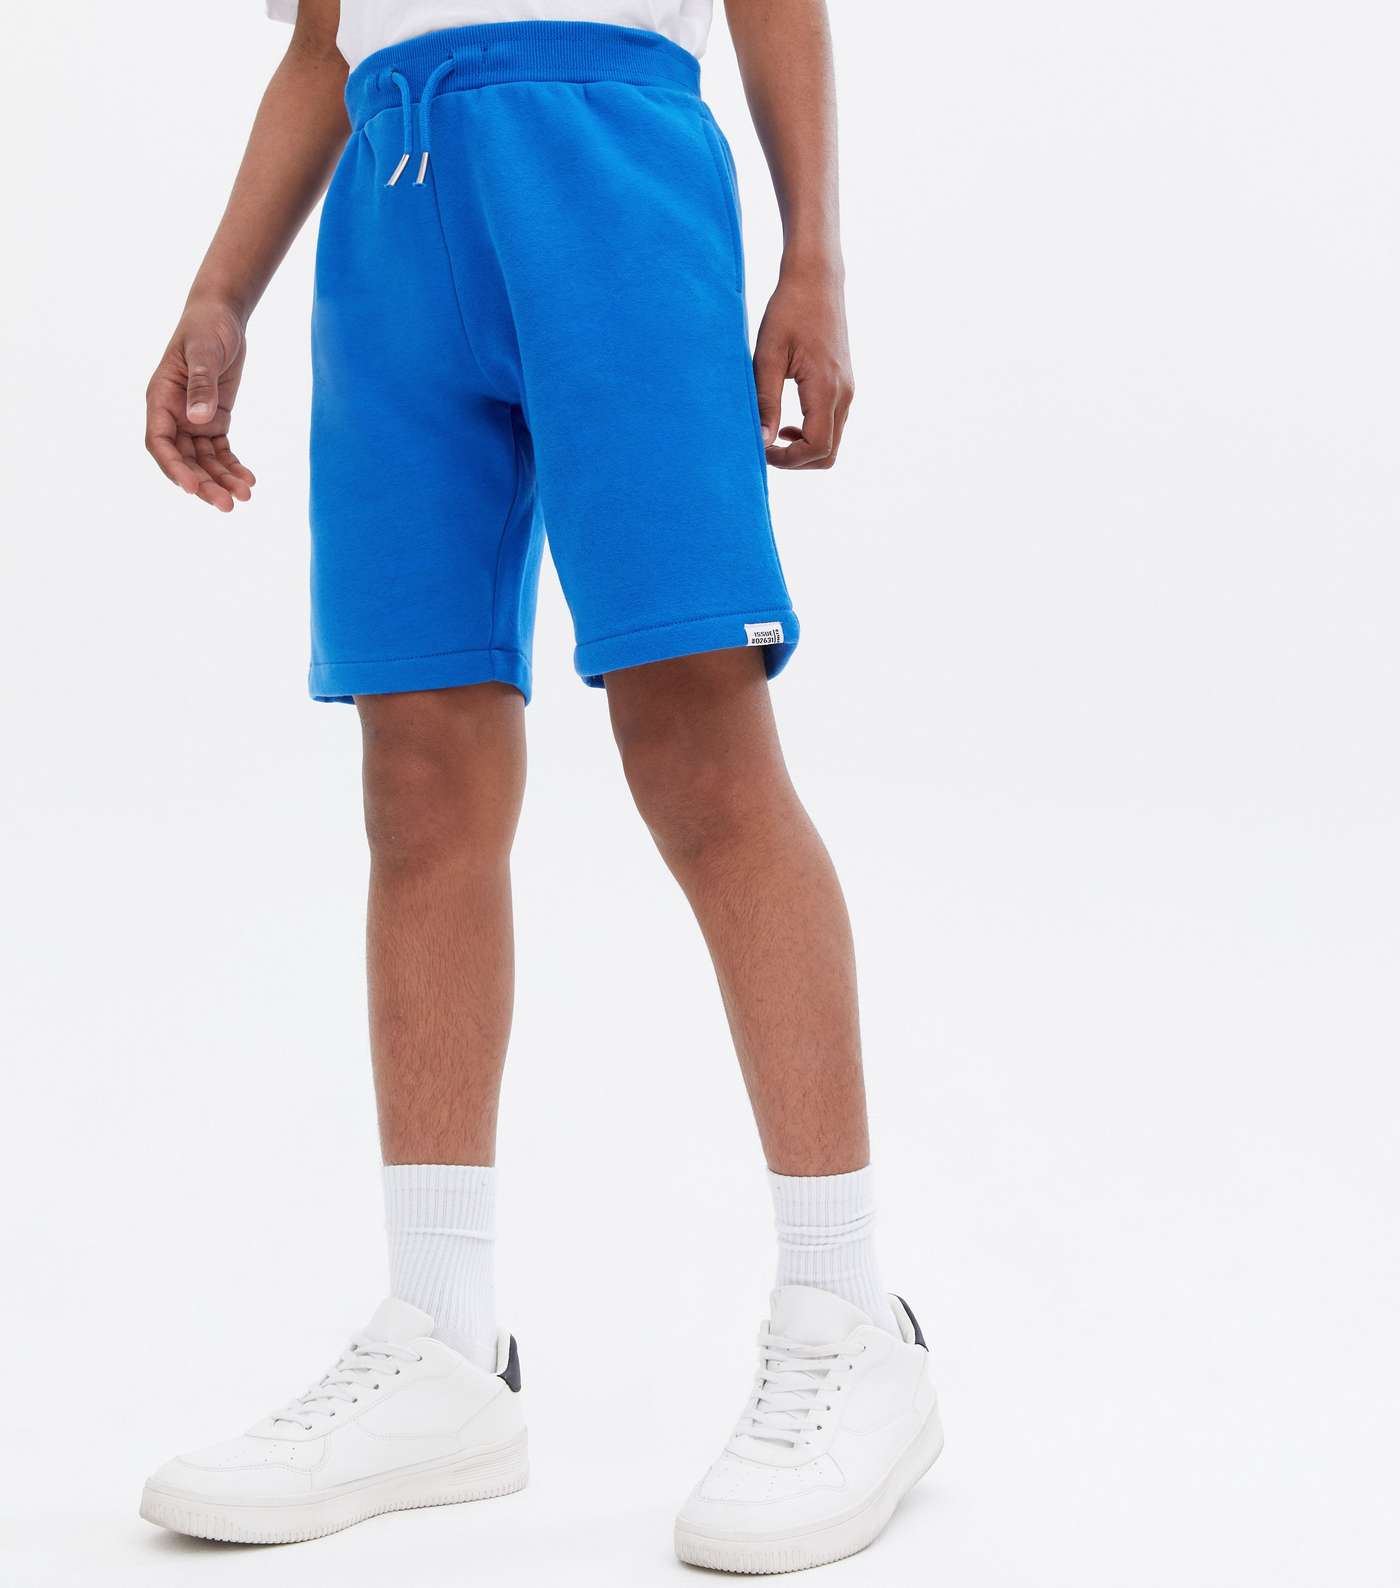 Boys 2 Pack Bright Blue and Black Jersey Shorts Image 3